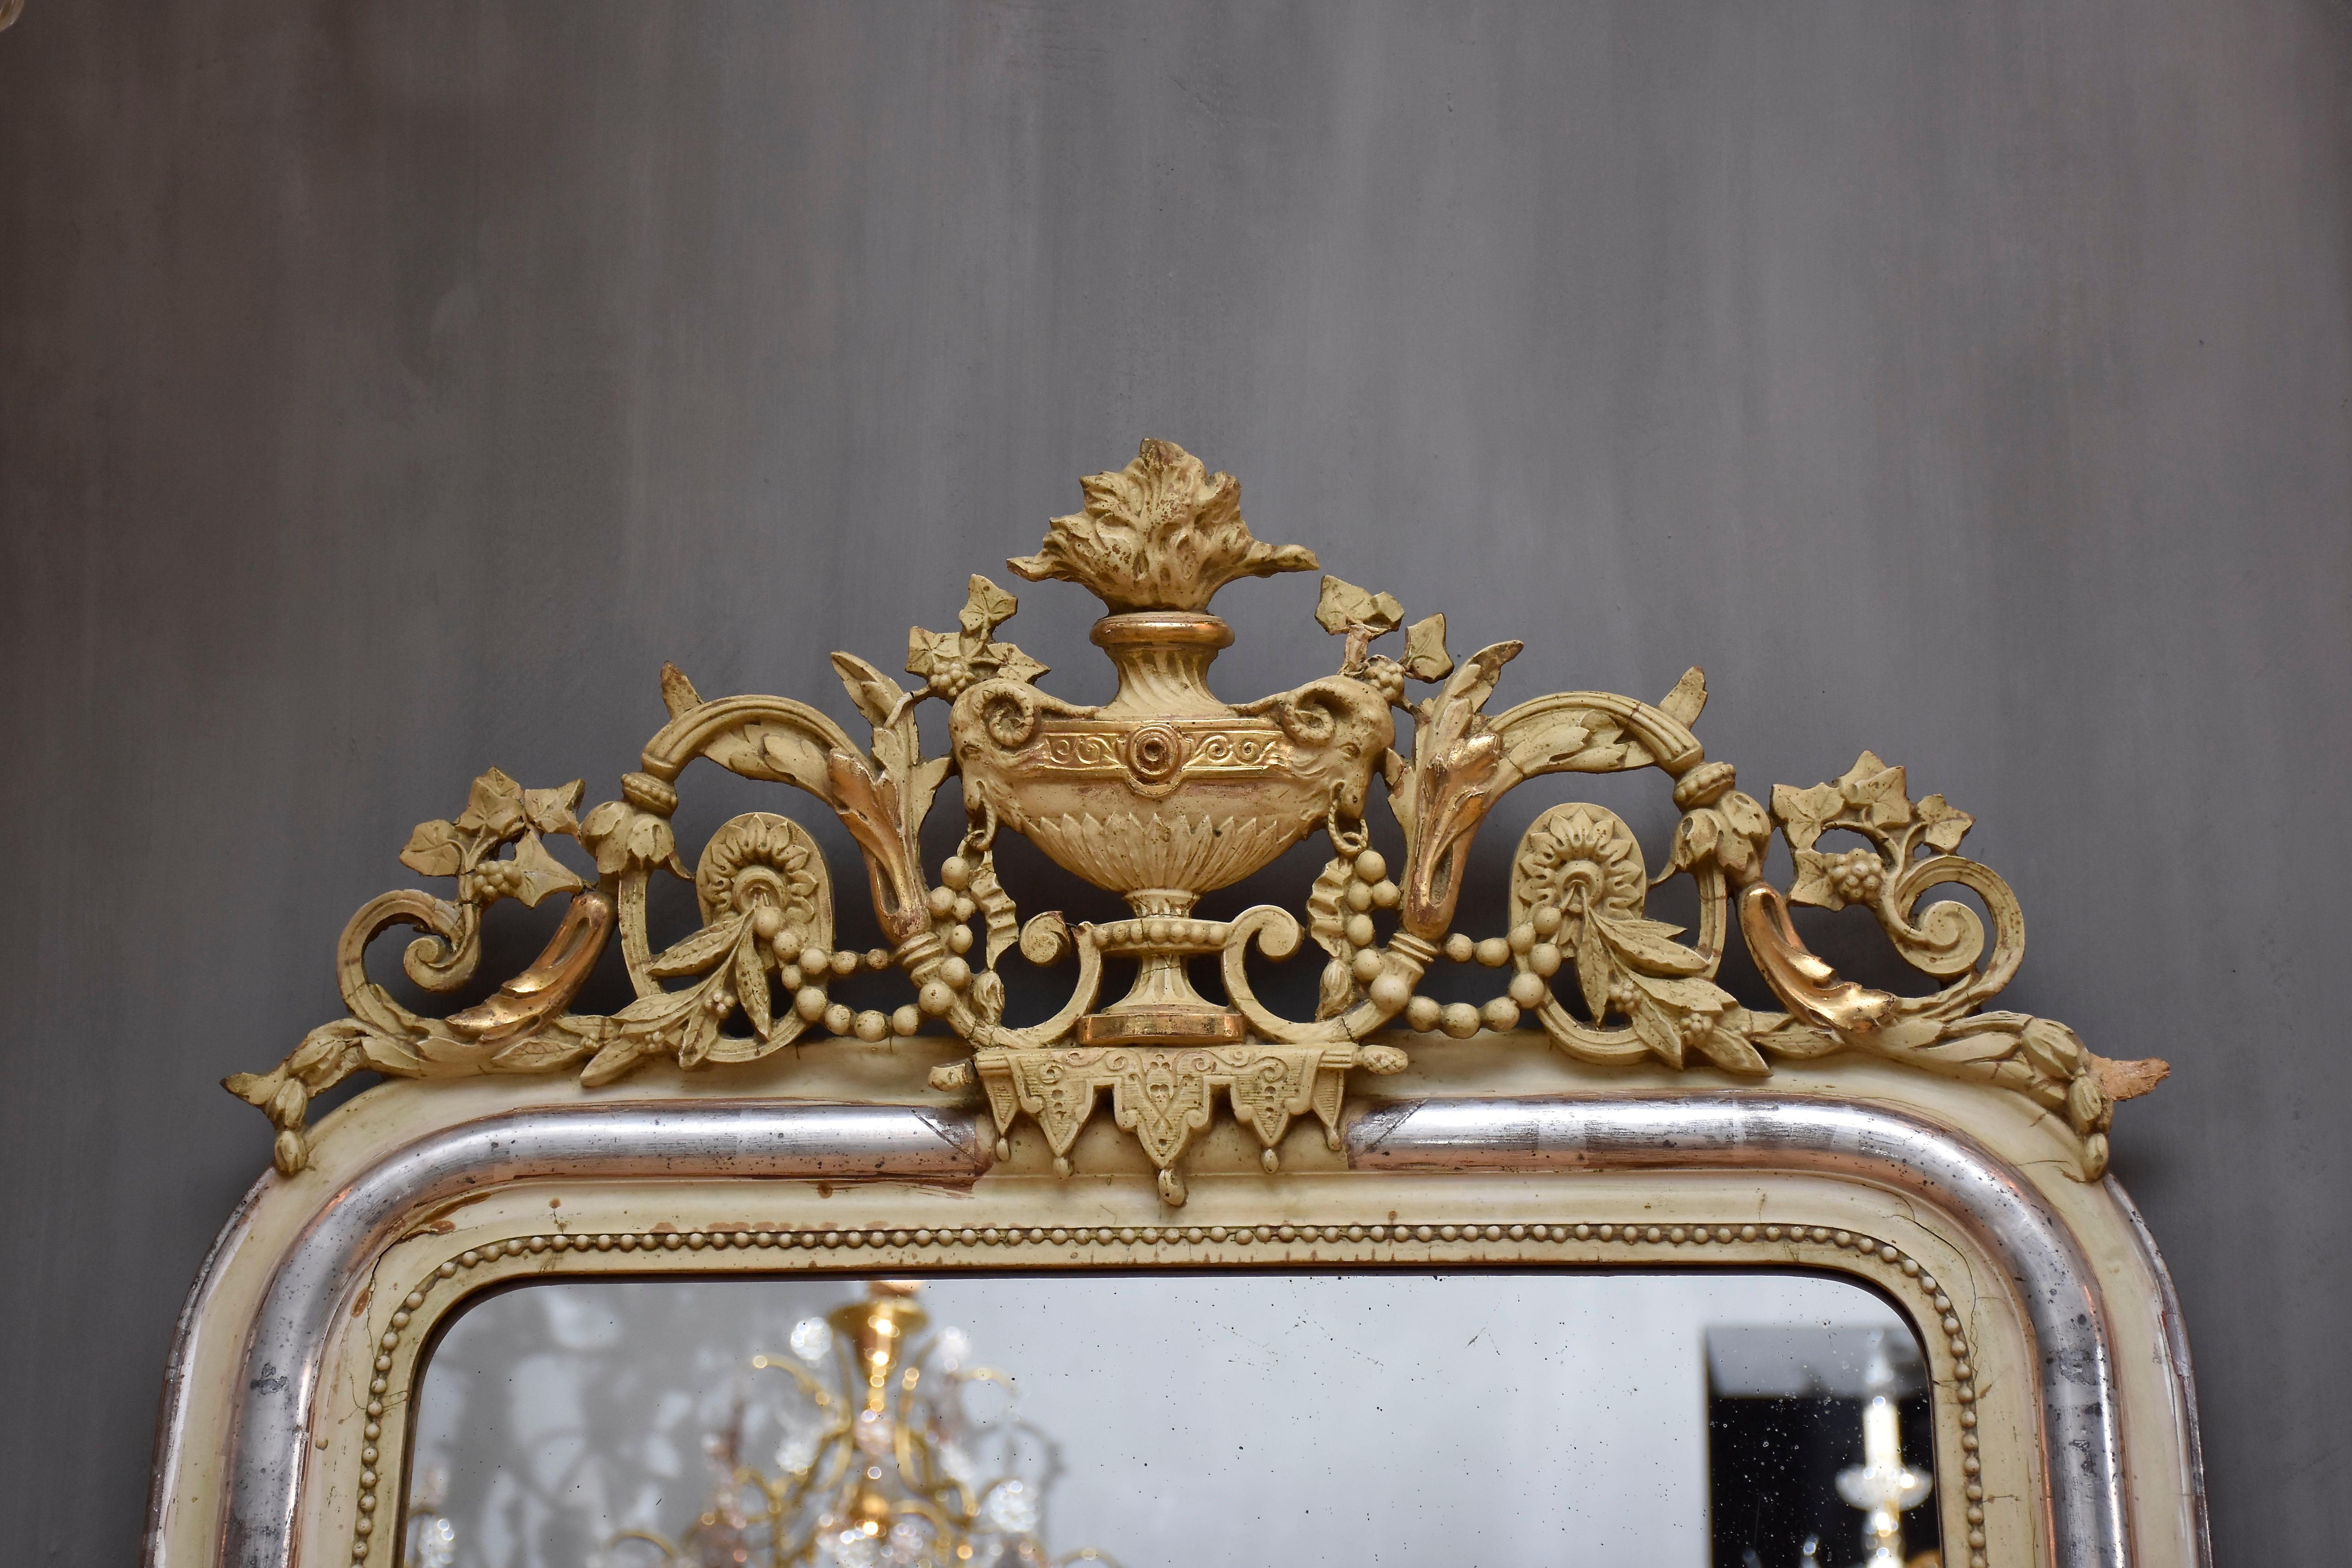 Gilt 19th century silver leaf gilt French mirror with a crest For Sale